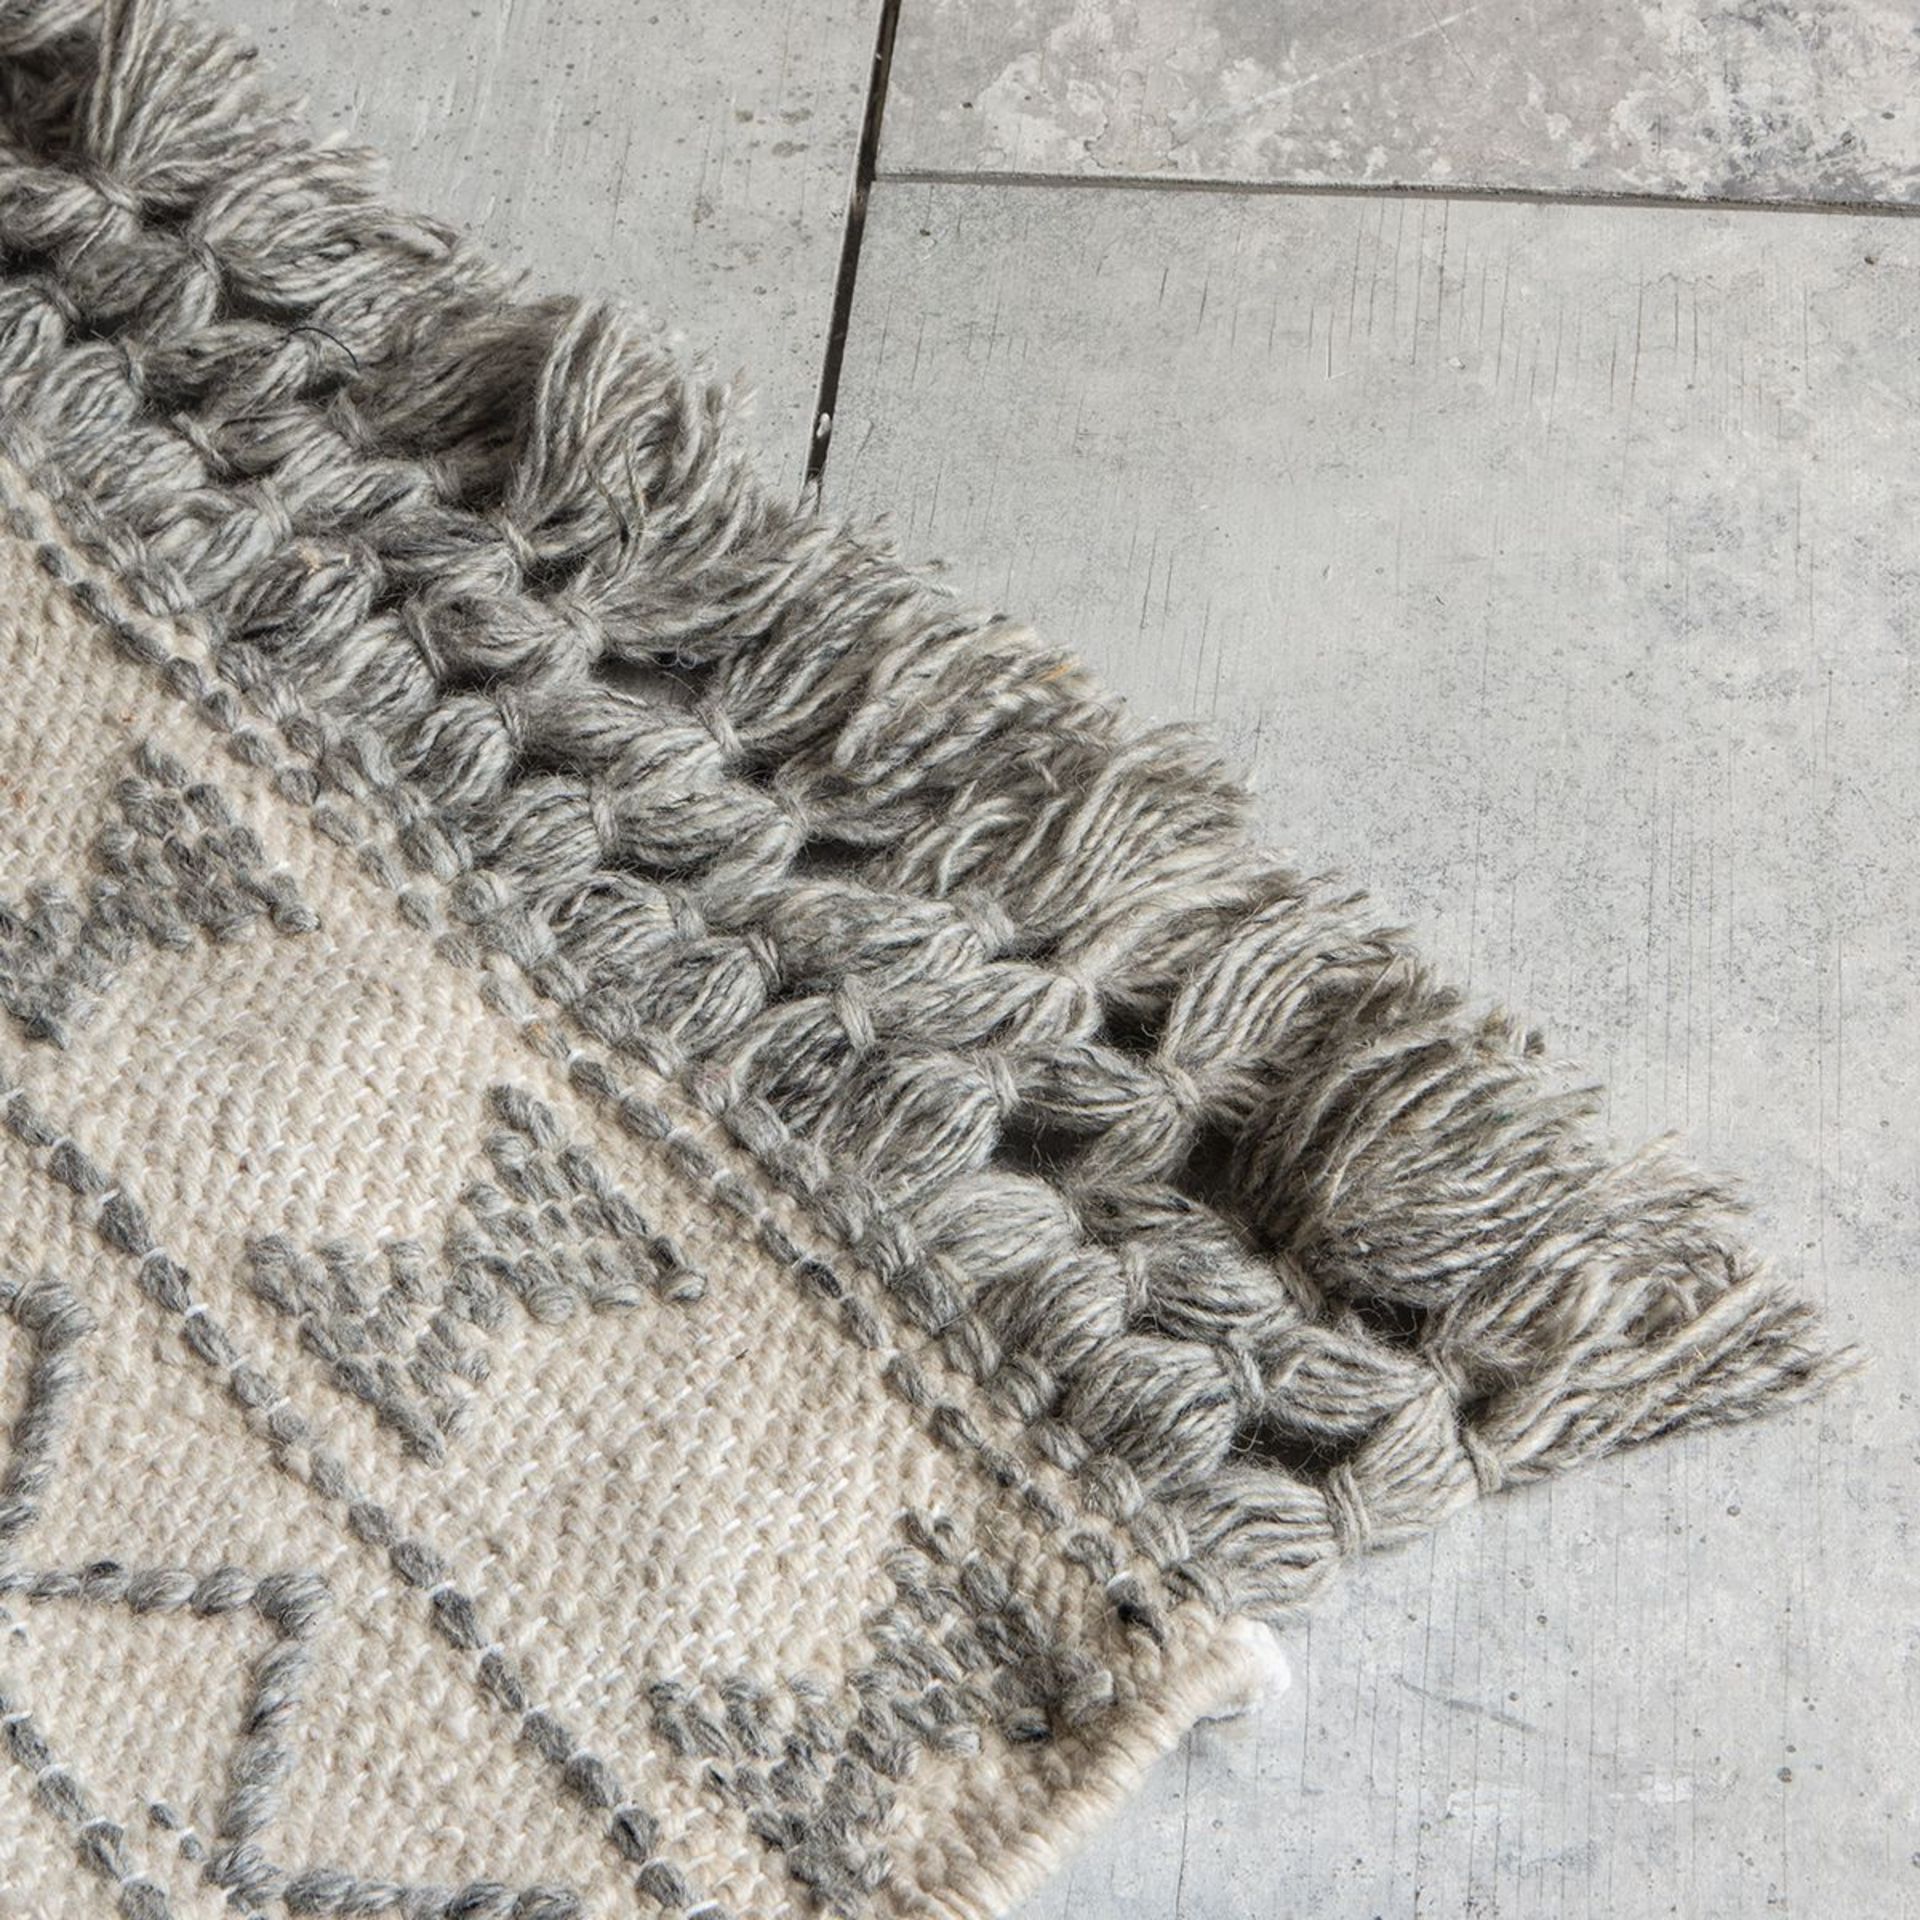 Peru Area Rug Ivory 120 x 170cm This Light Weight, Cream And Grey Aztec Inspired Rug Is The Ideal - Image 2 of 3